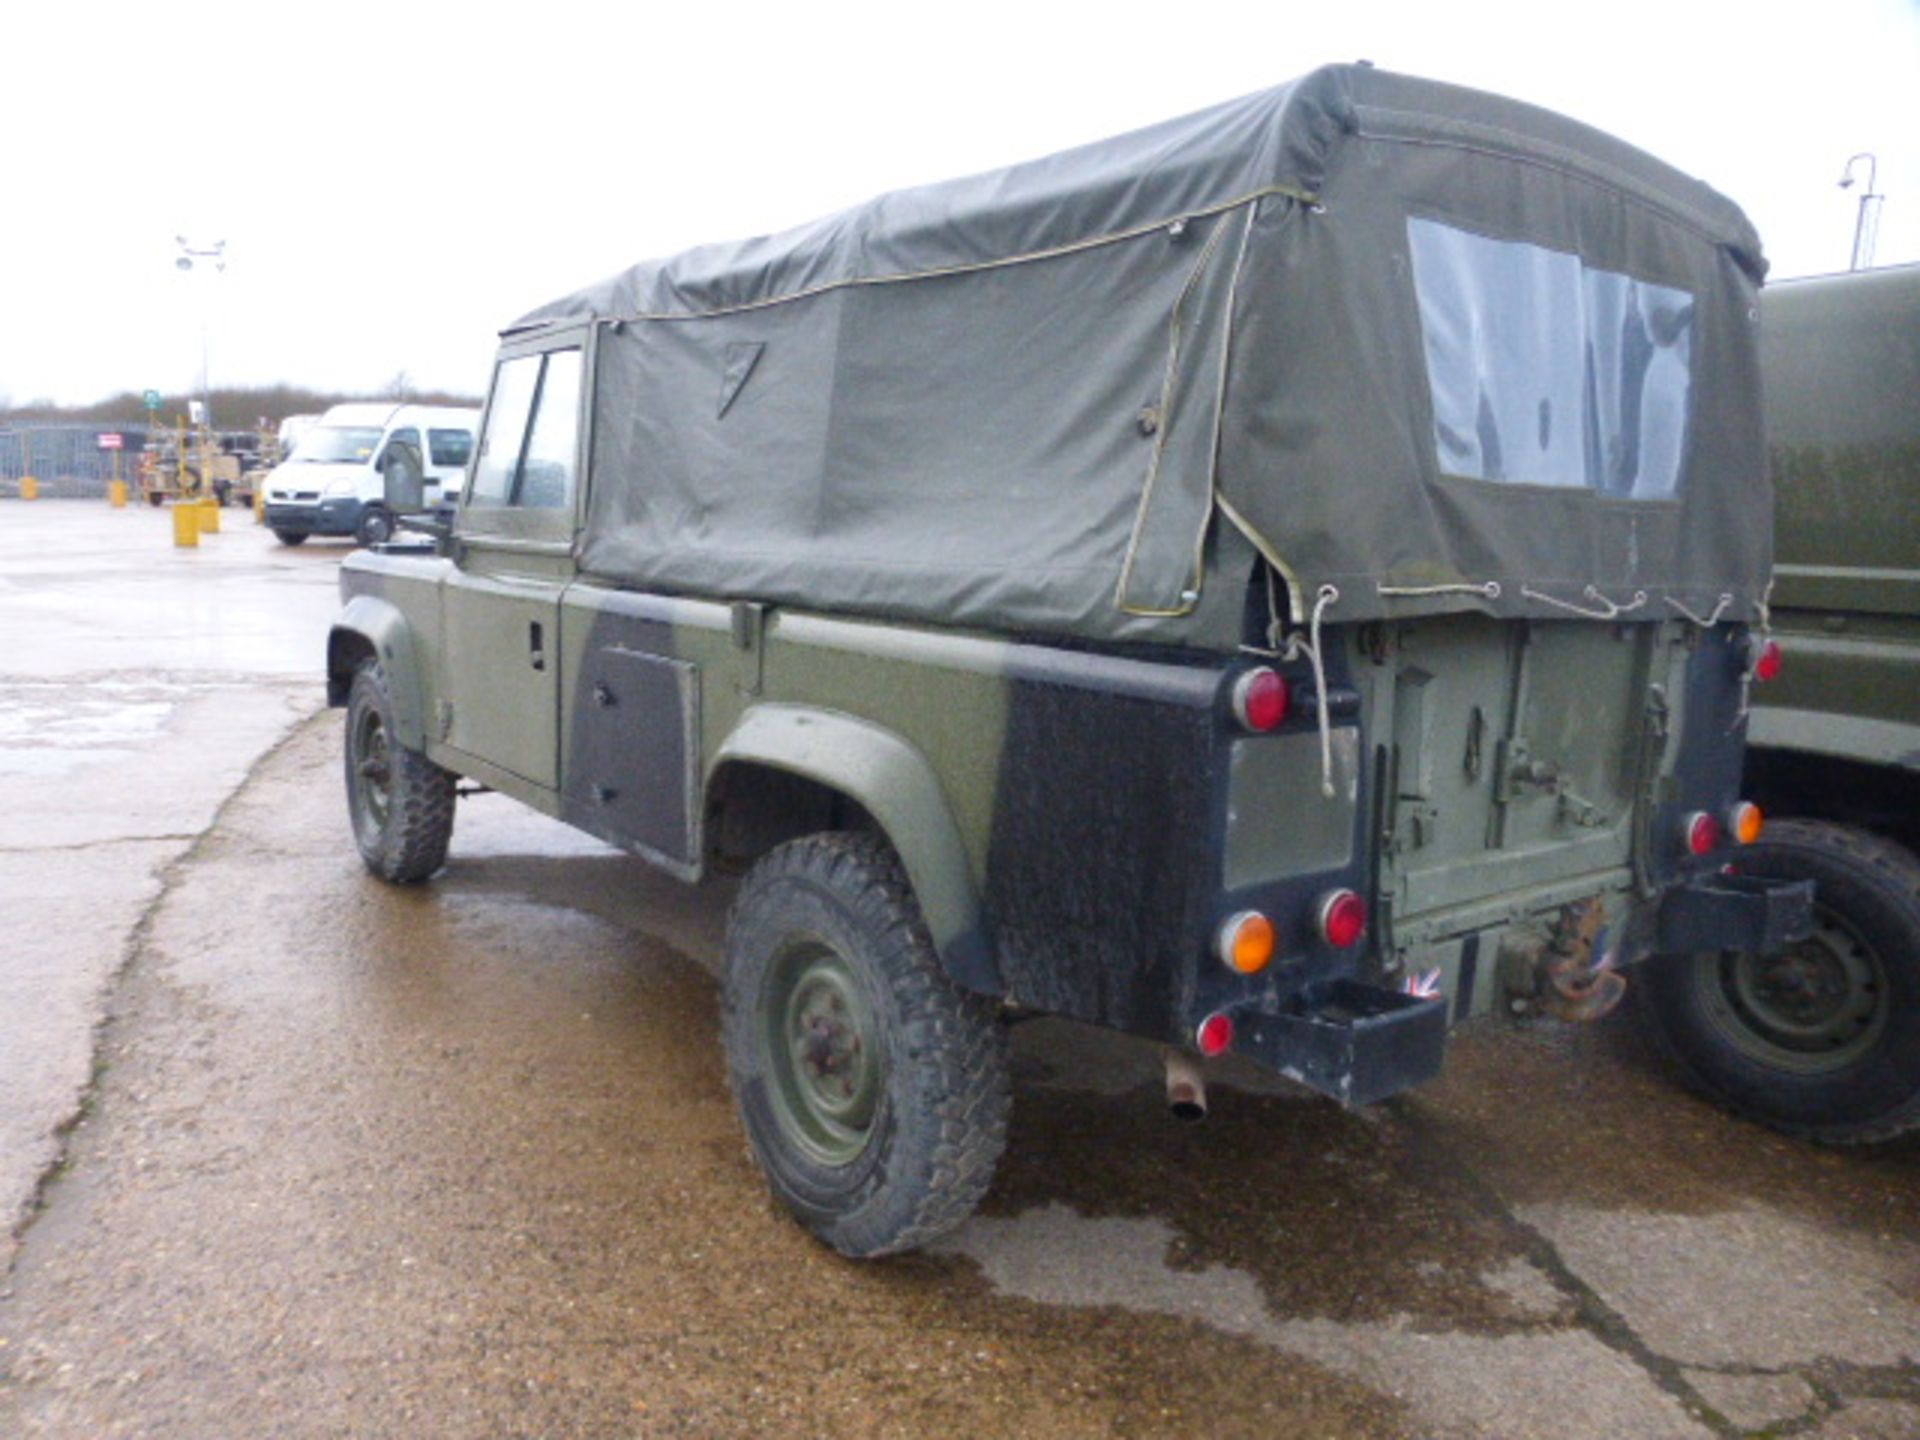 Land Rover 110 soft top with rear seats, RHD, 2.5 N/A diesel engine, Wolf wheels, etc. 22,000 KMs. - Image 3 of 4